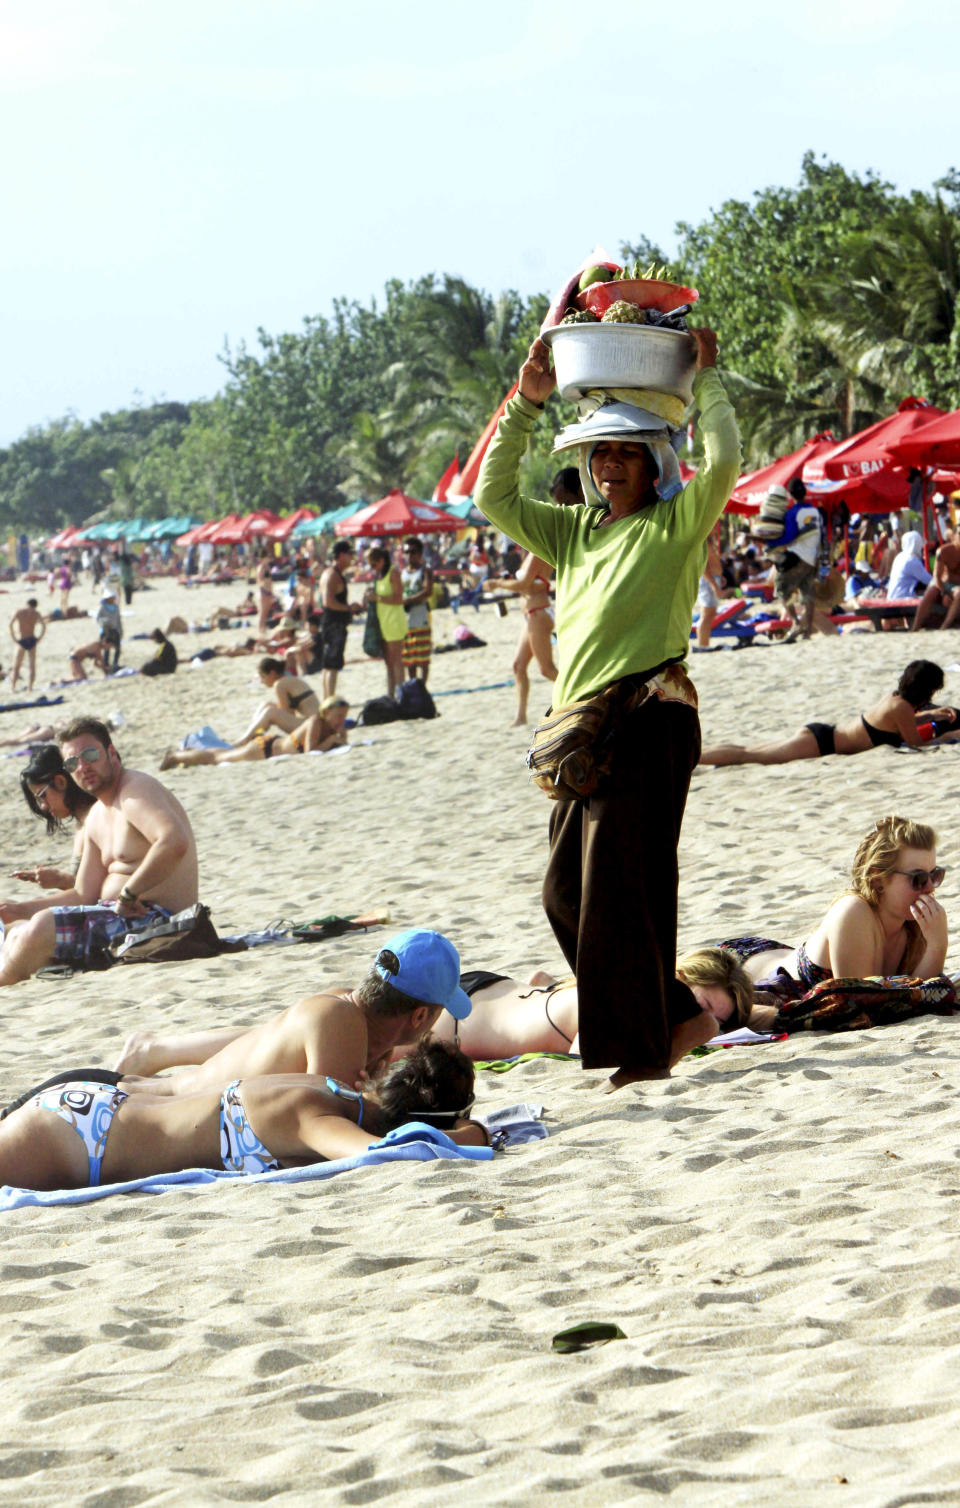 This Aug. 25, 2012 photo shows a Balinese vendor selling fruit to tourists on Kuta beach, Bali, Indonesia. Bali expects to find an undiscovered paradise. It can be hard to find Bali's serenity and beauty amid the villas with infinity pools and ads for Italian restaurants. But the rapidly developing island's simple pleasures still exist, in deserted beaches, simple meals of fried rice and coconut juice, and scenes of rural life. (AP Photo/Firdia Lisnawati)